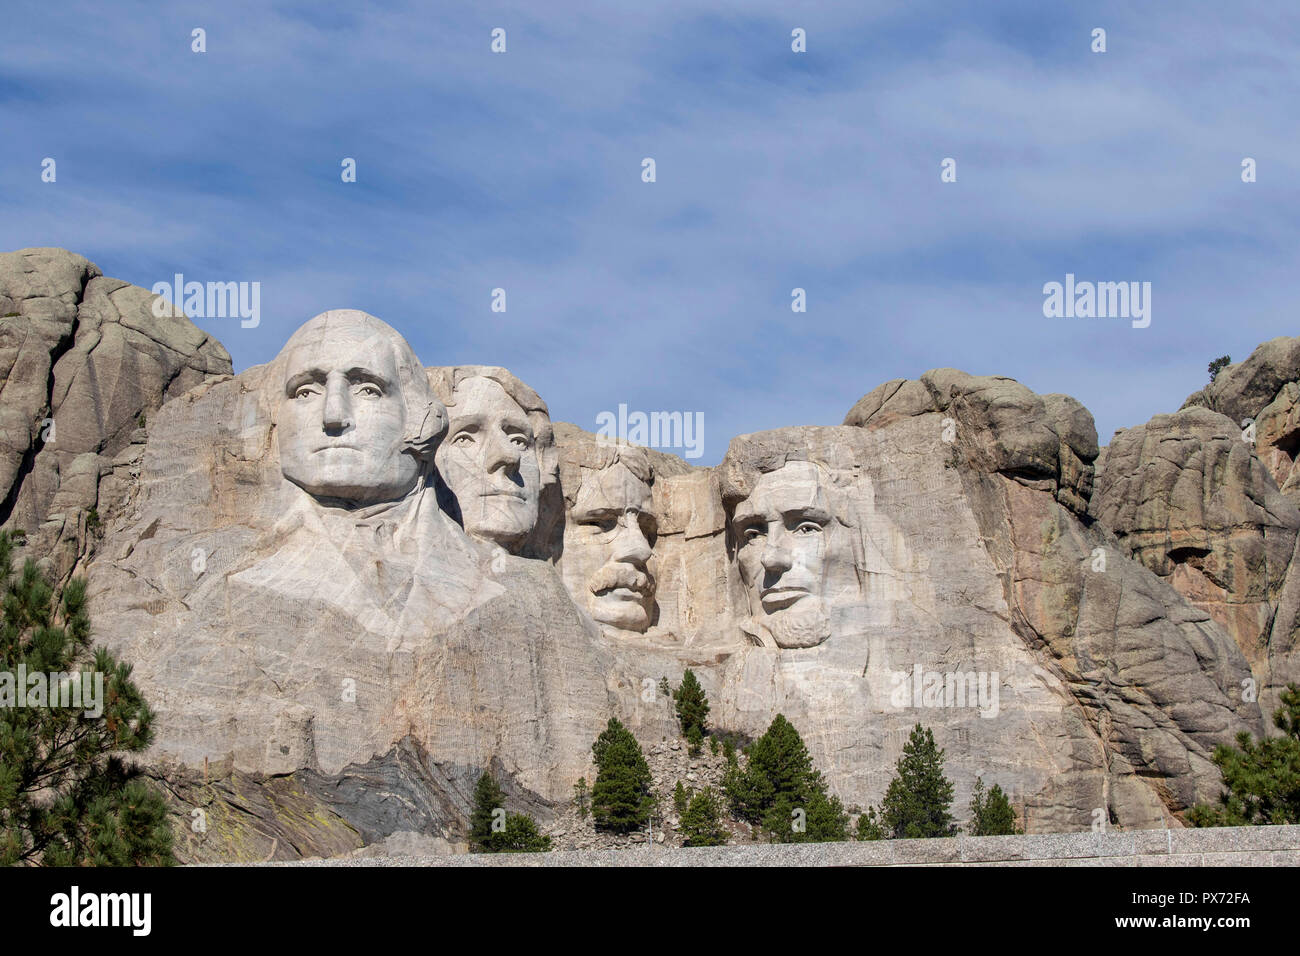 Mont Rushmore Banque D'Images